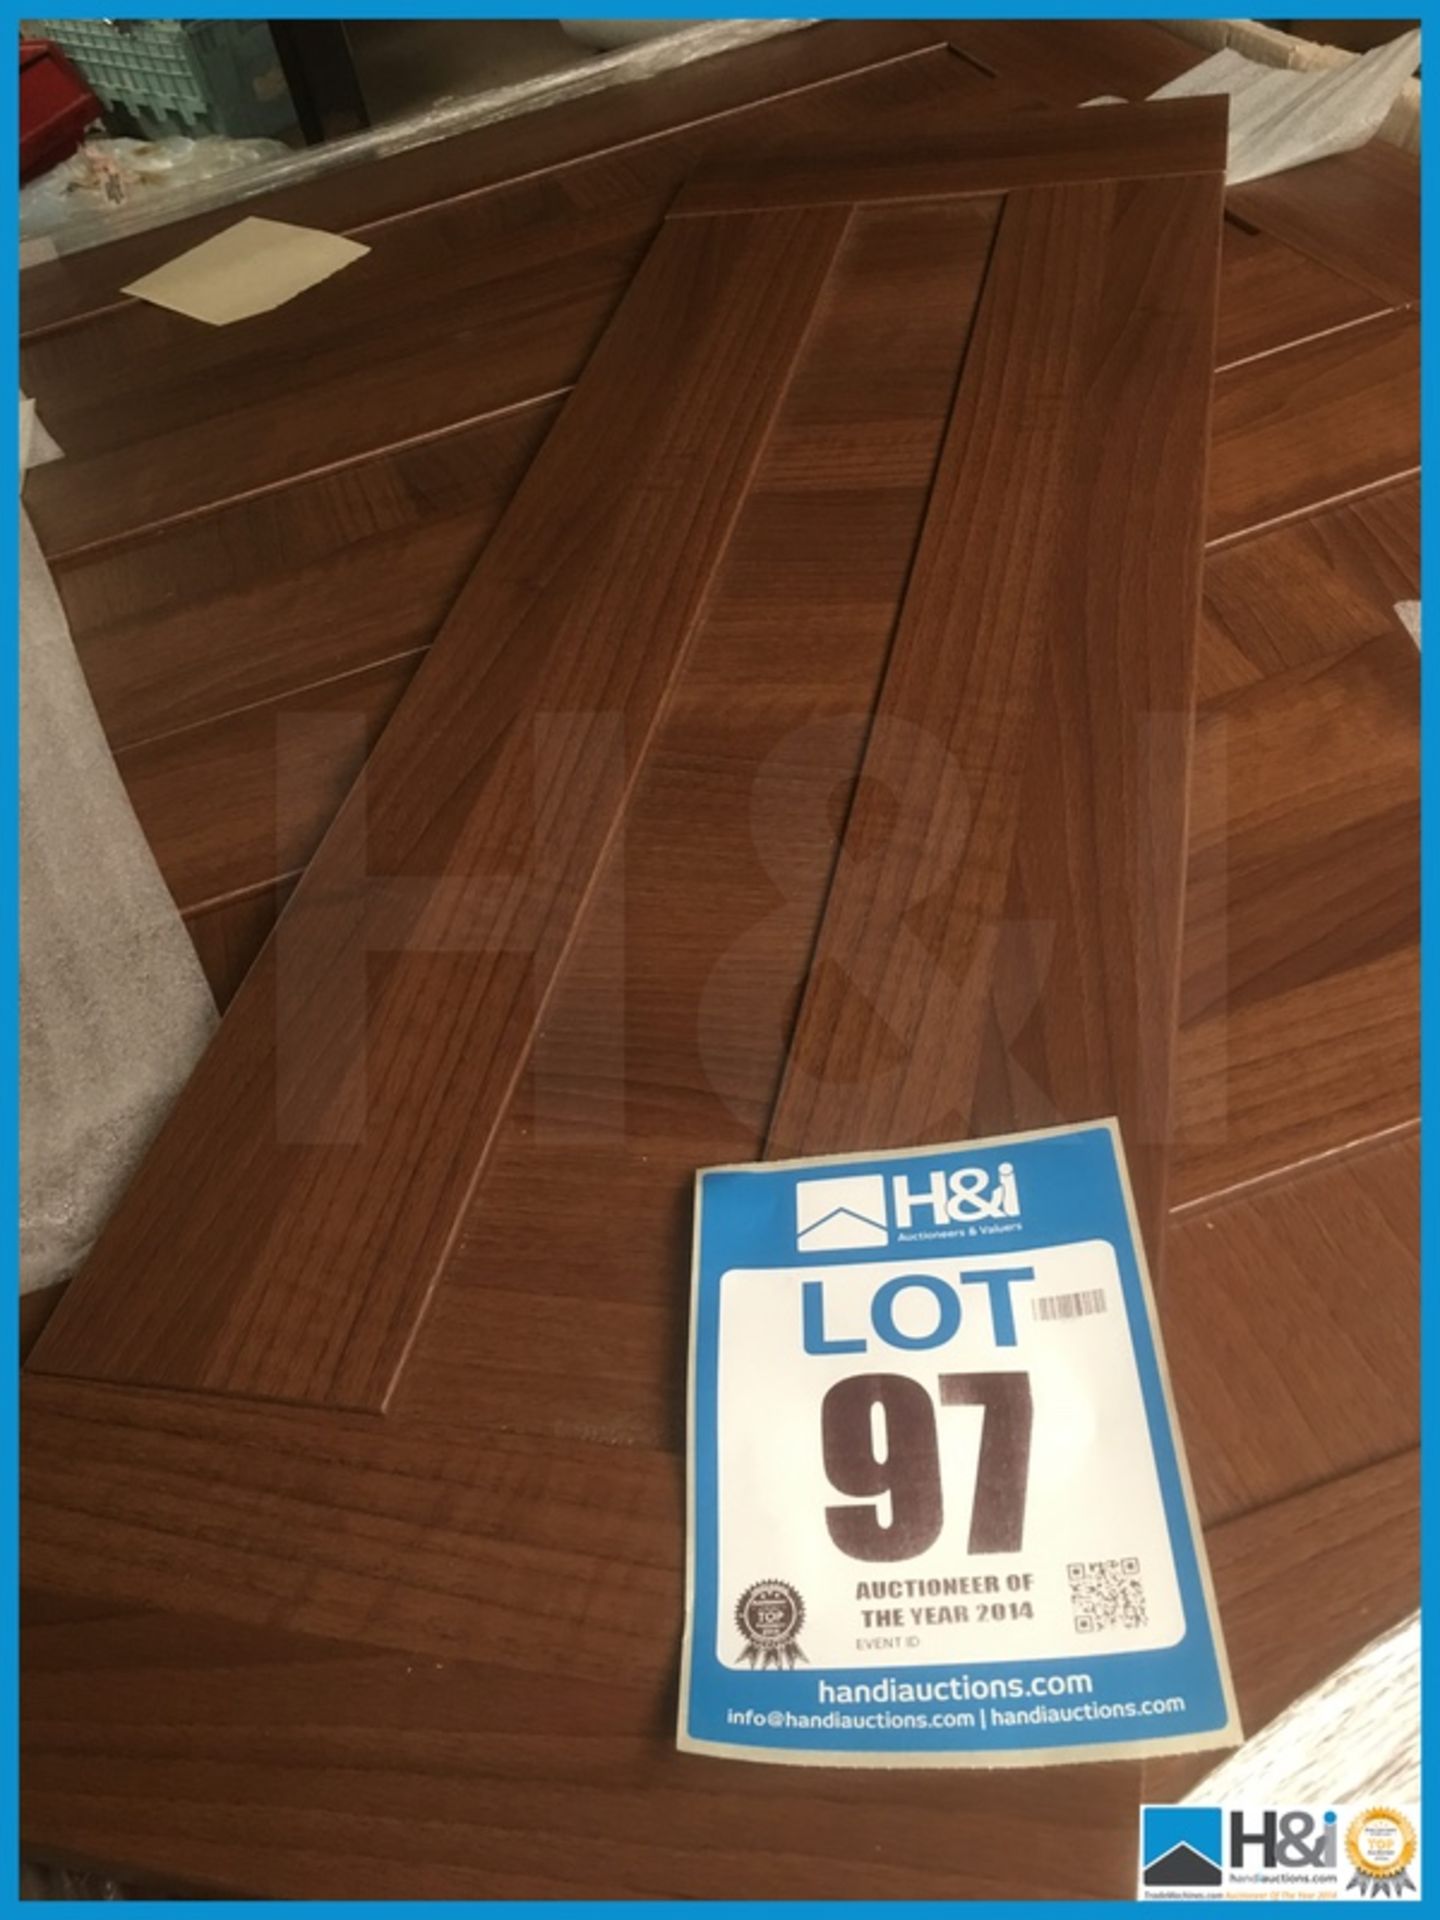 Approx x 100 284mm X 895 mm American walnut contemporary kitchen door with retail value of lot £